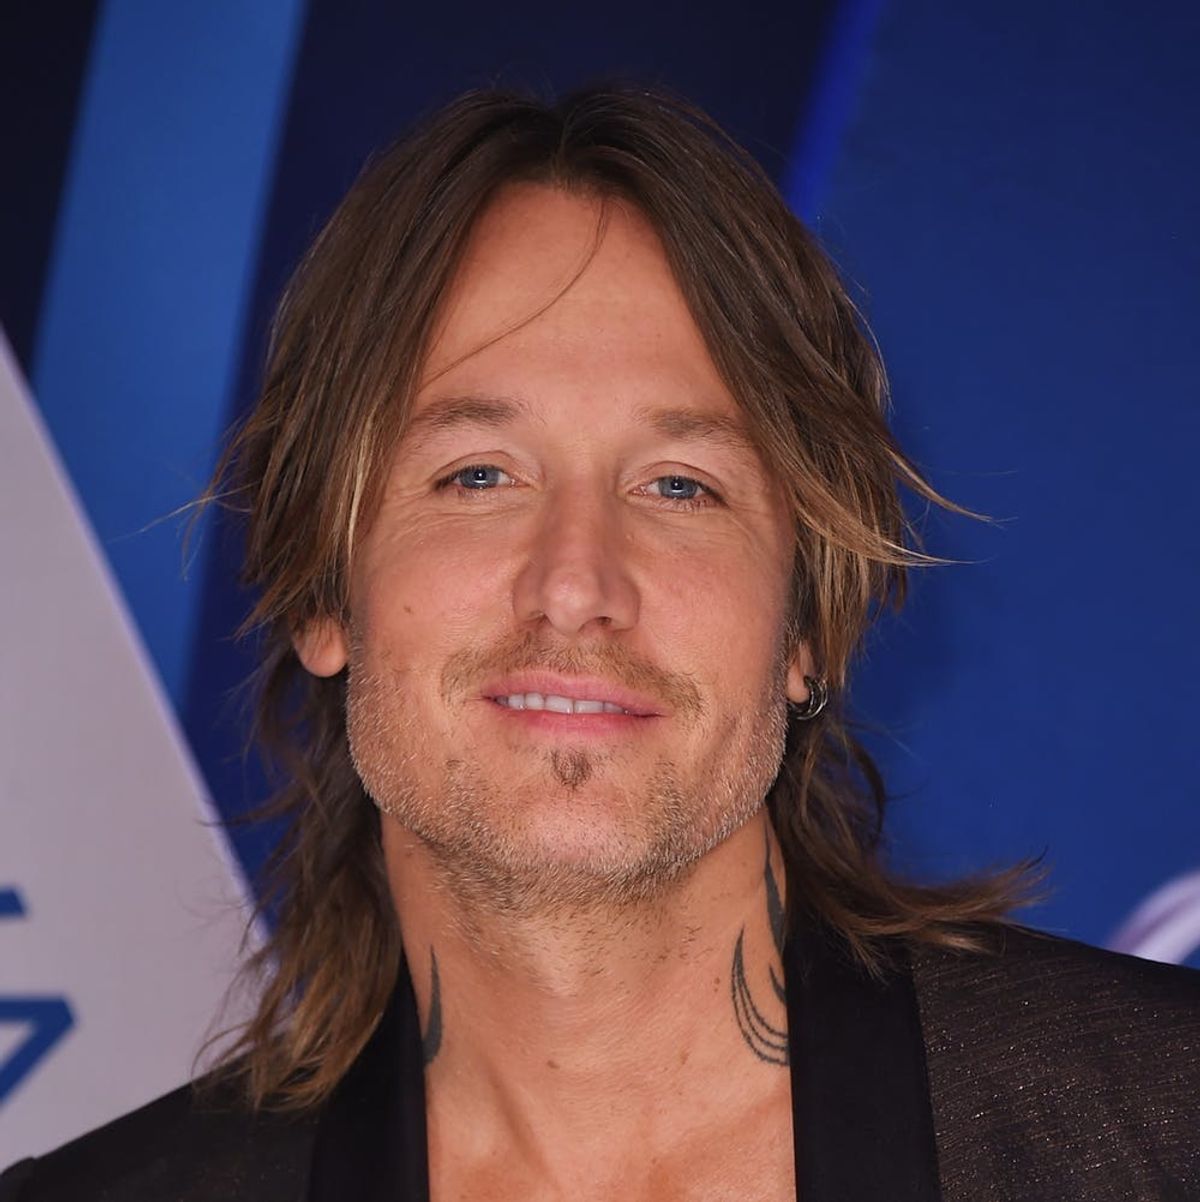 Keith Urban’s New Song Is “Inspired” by the Victims of Harvey Weinstein